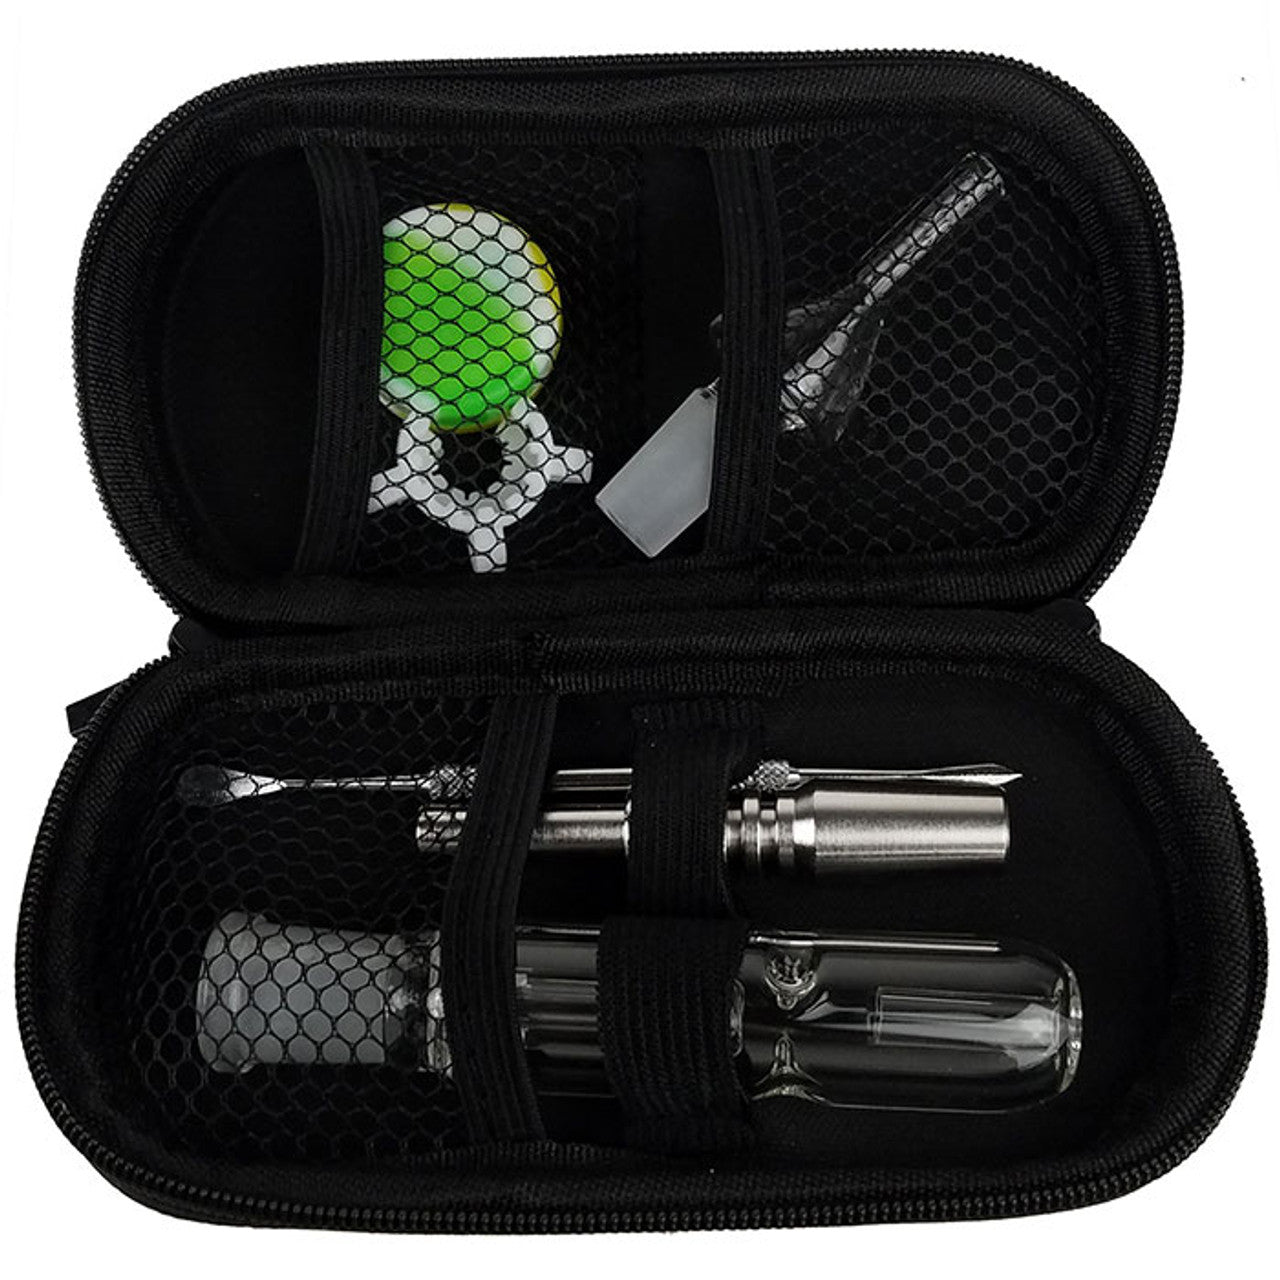 Silicone Travel Wax Oil Smoking DAB Kit Glass Nectar Collector - China  Nectar Collector and Glass Nectar Collector price